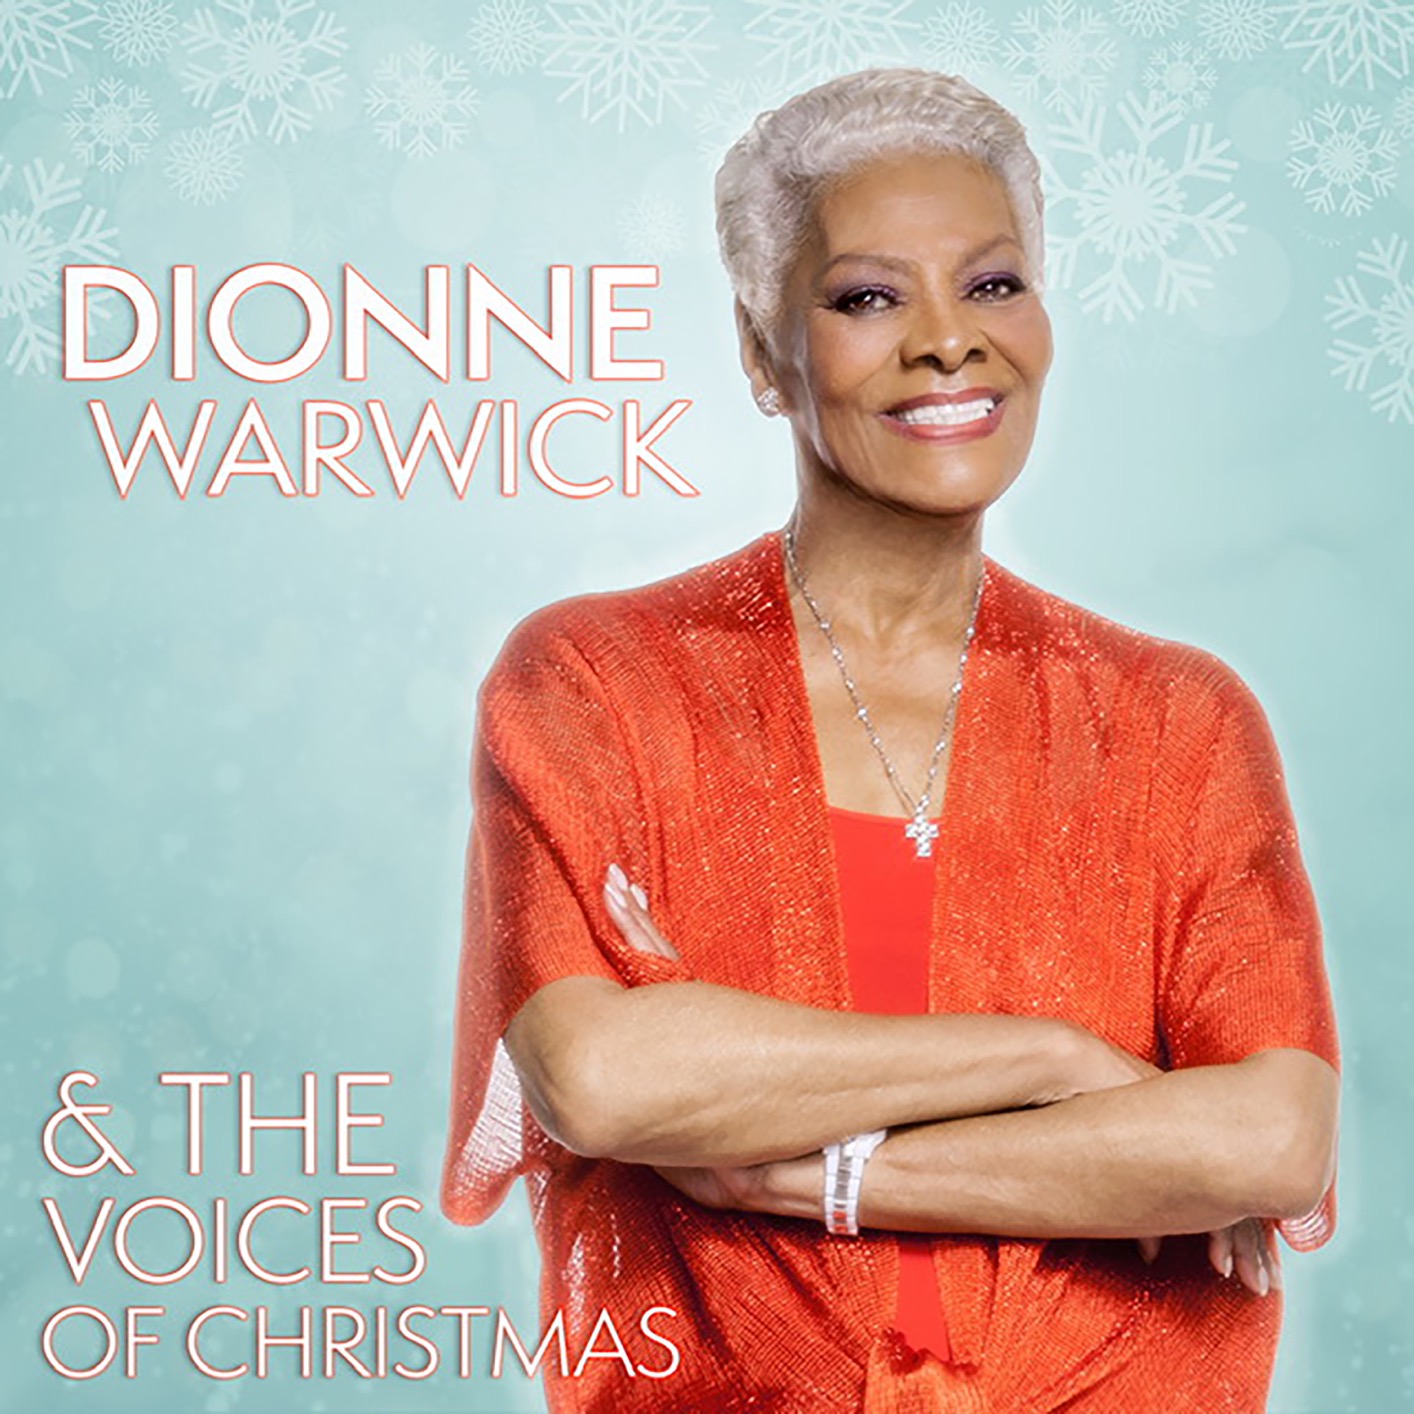 Dionne Warwick – Dionne Warwick & The Voices of Christmas (2019) [FLAC 24bit/48kHz]